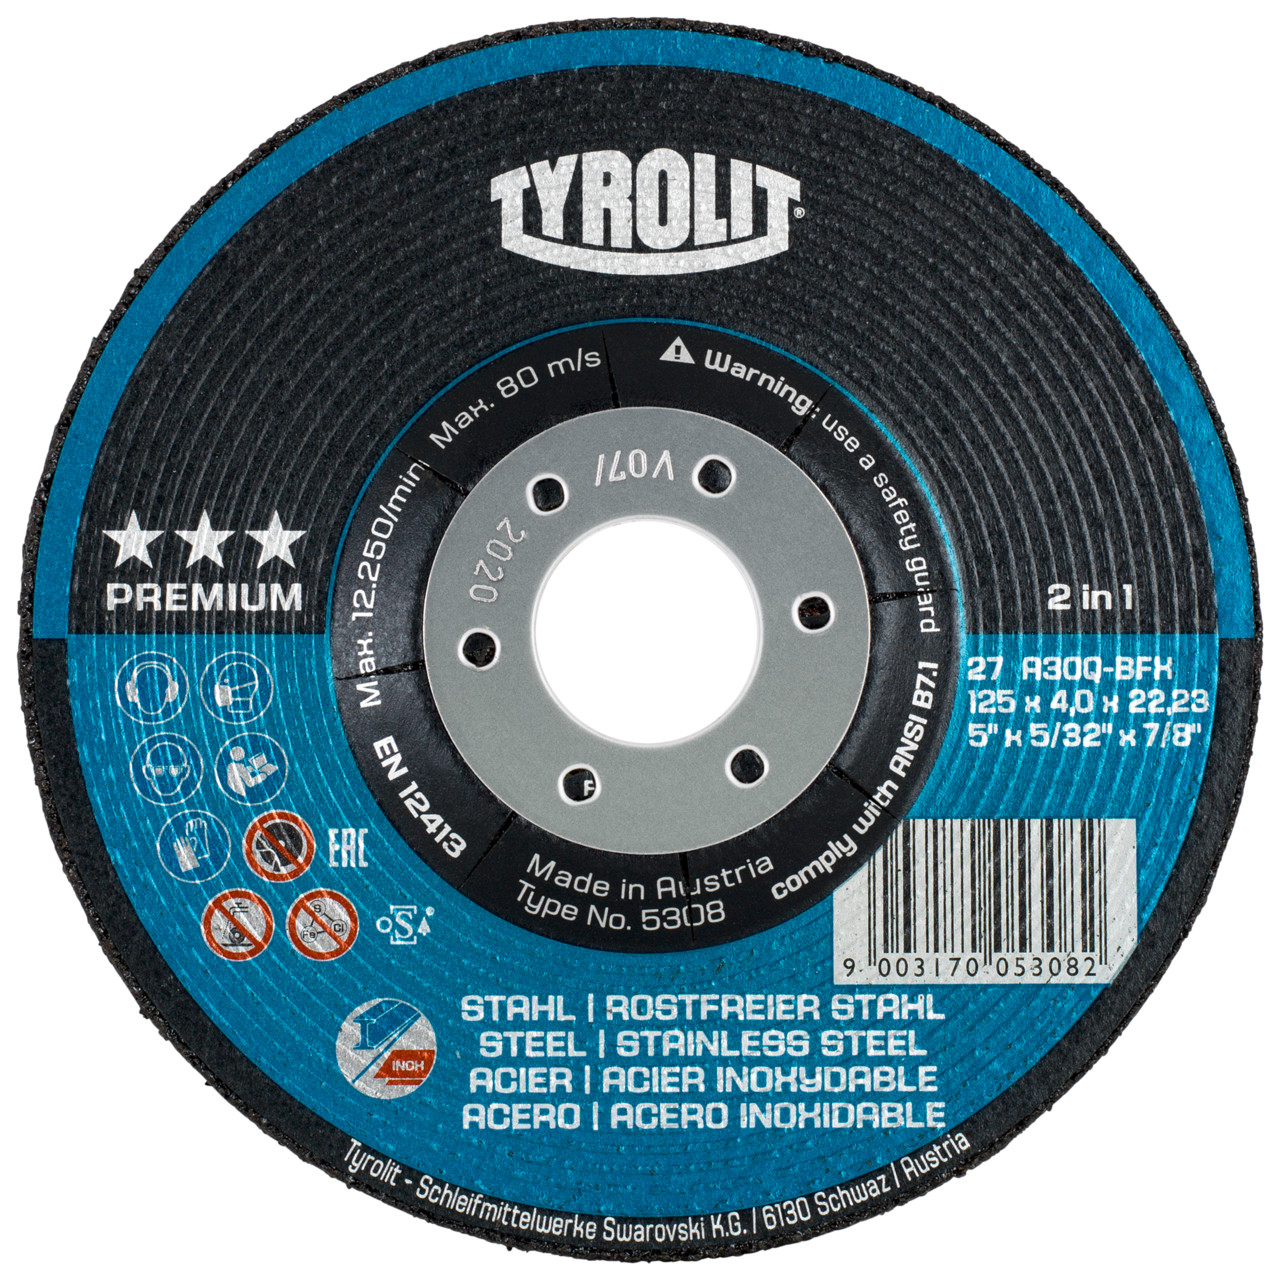 TYROLIT grinding disc DxUxH 125x4x22.23 2in1 for steel and stainless steel, shape: 27 - offset version, Art. 5308